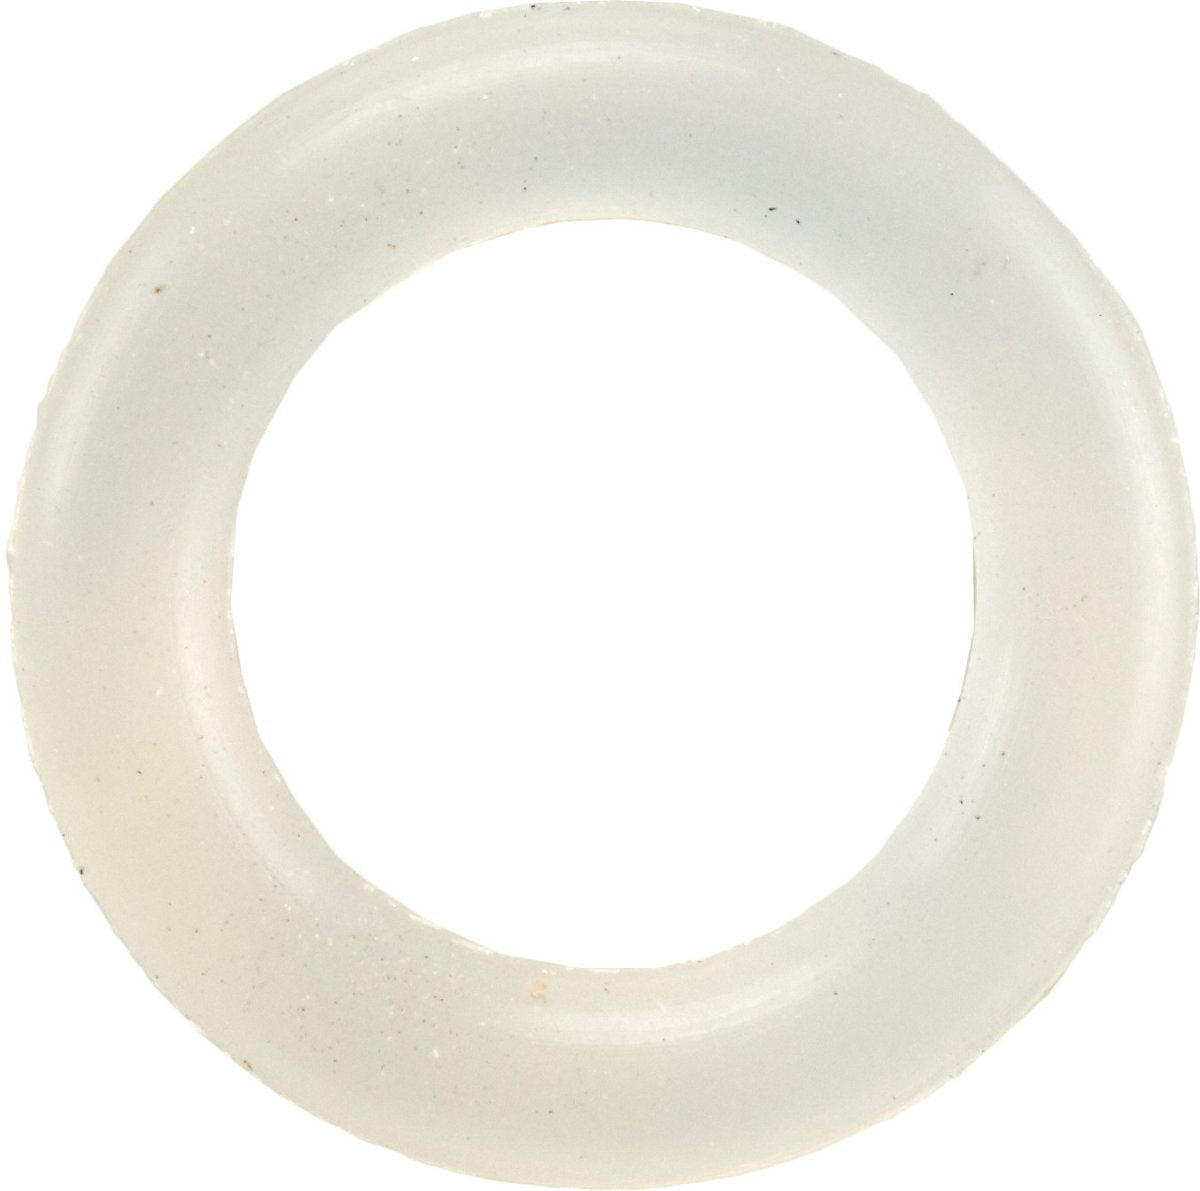 The O-Wacky Replacement O-Rings_Translucent